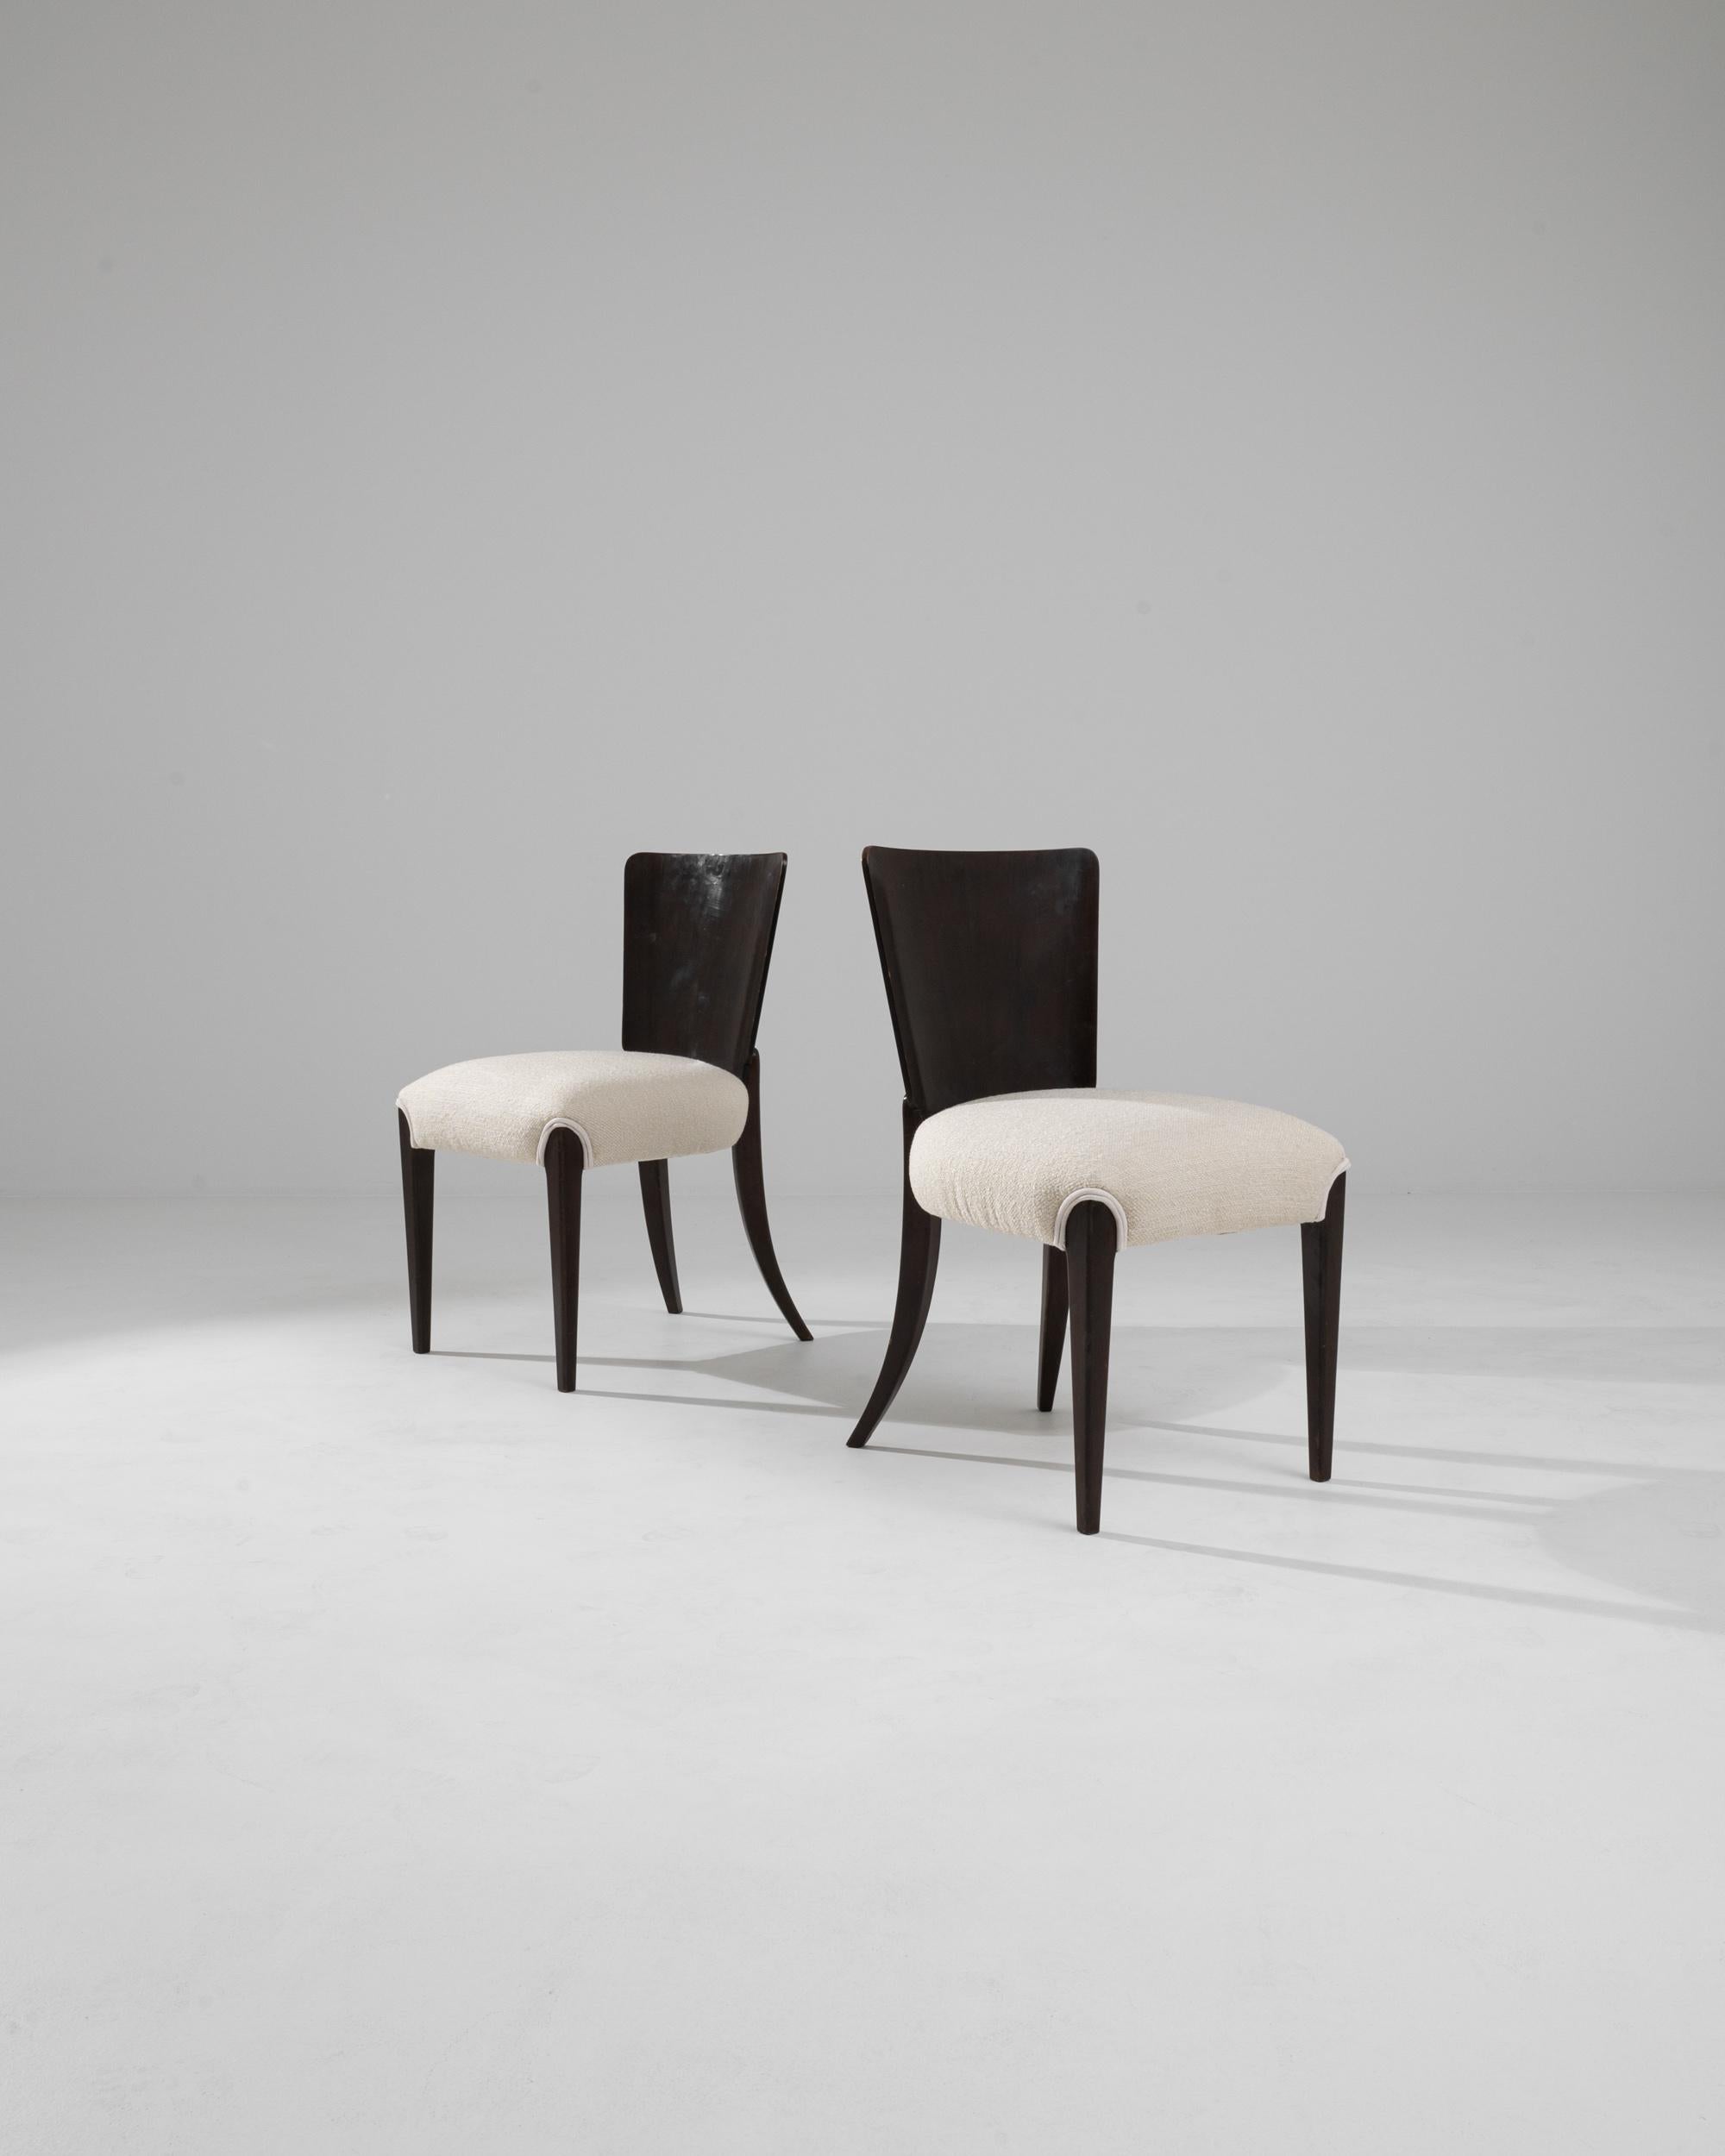 The 20th Century Czech chairs by J. Halabala offer a masterclass in the fusion of functional design and artistic elegance. These chairs showcase Halabala's signature streamlined curves and a keen eye for the balance between form and function. The